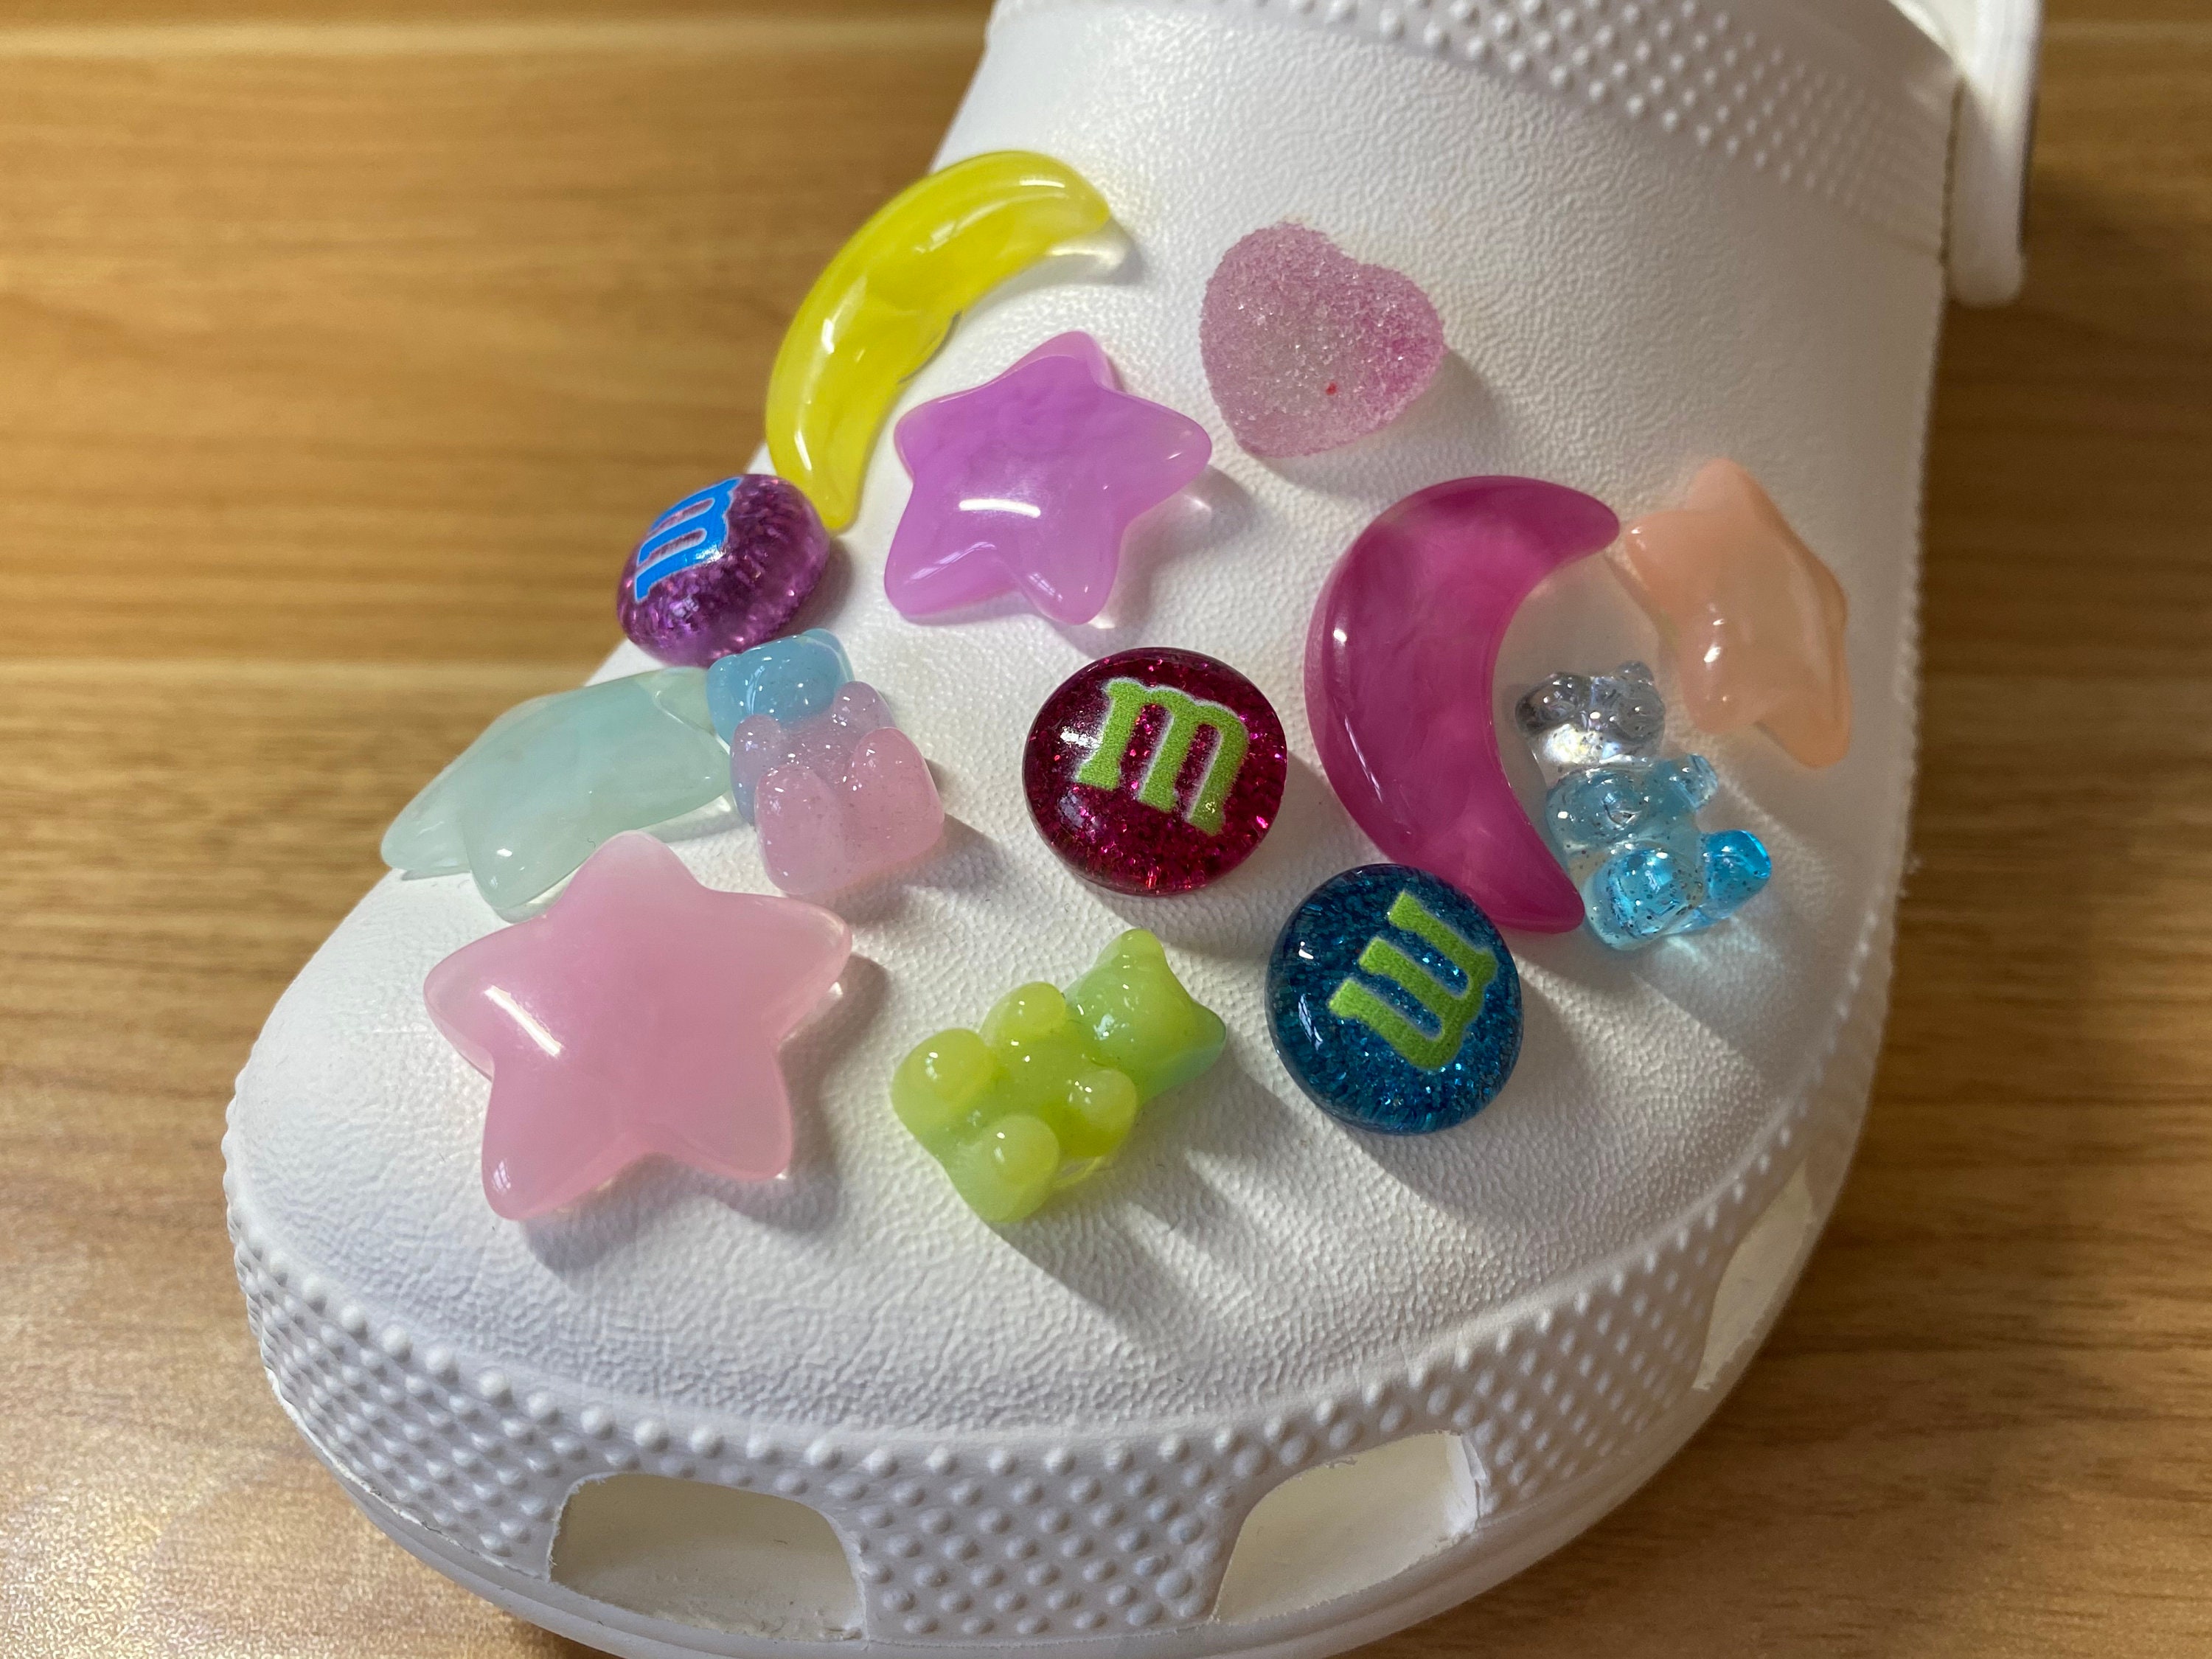 NWOT crocs authentic jibbitz charms multiple rare characters discontinued